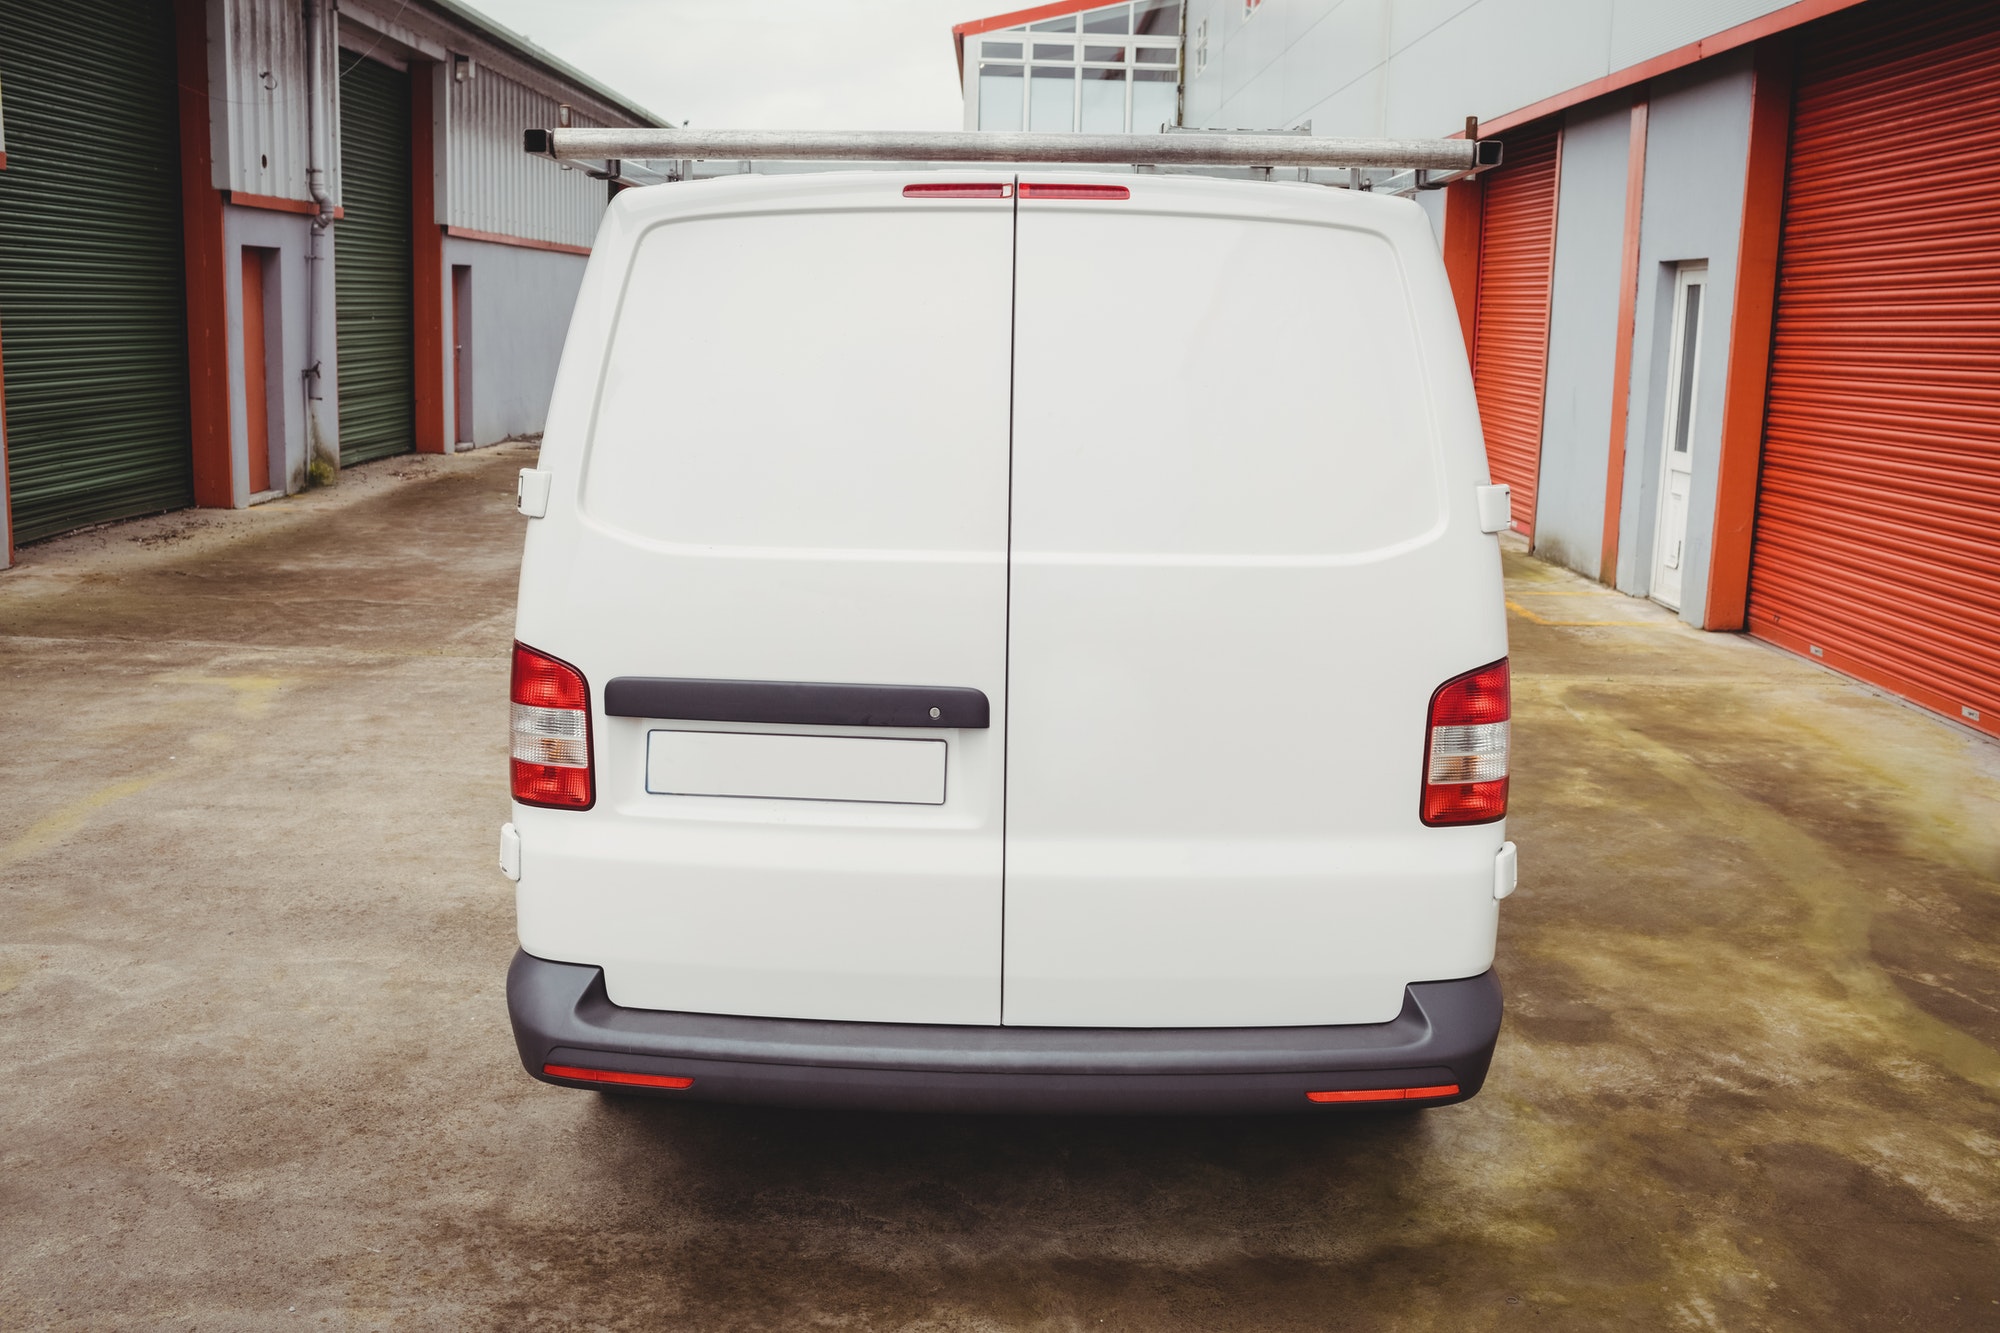 Picture of a white van